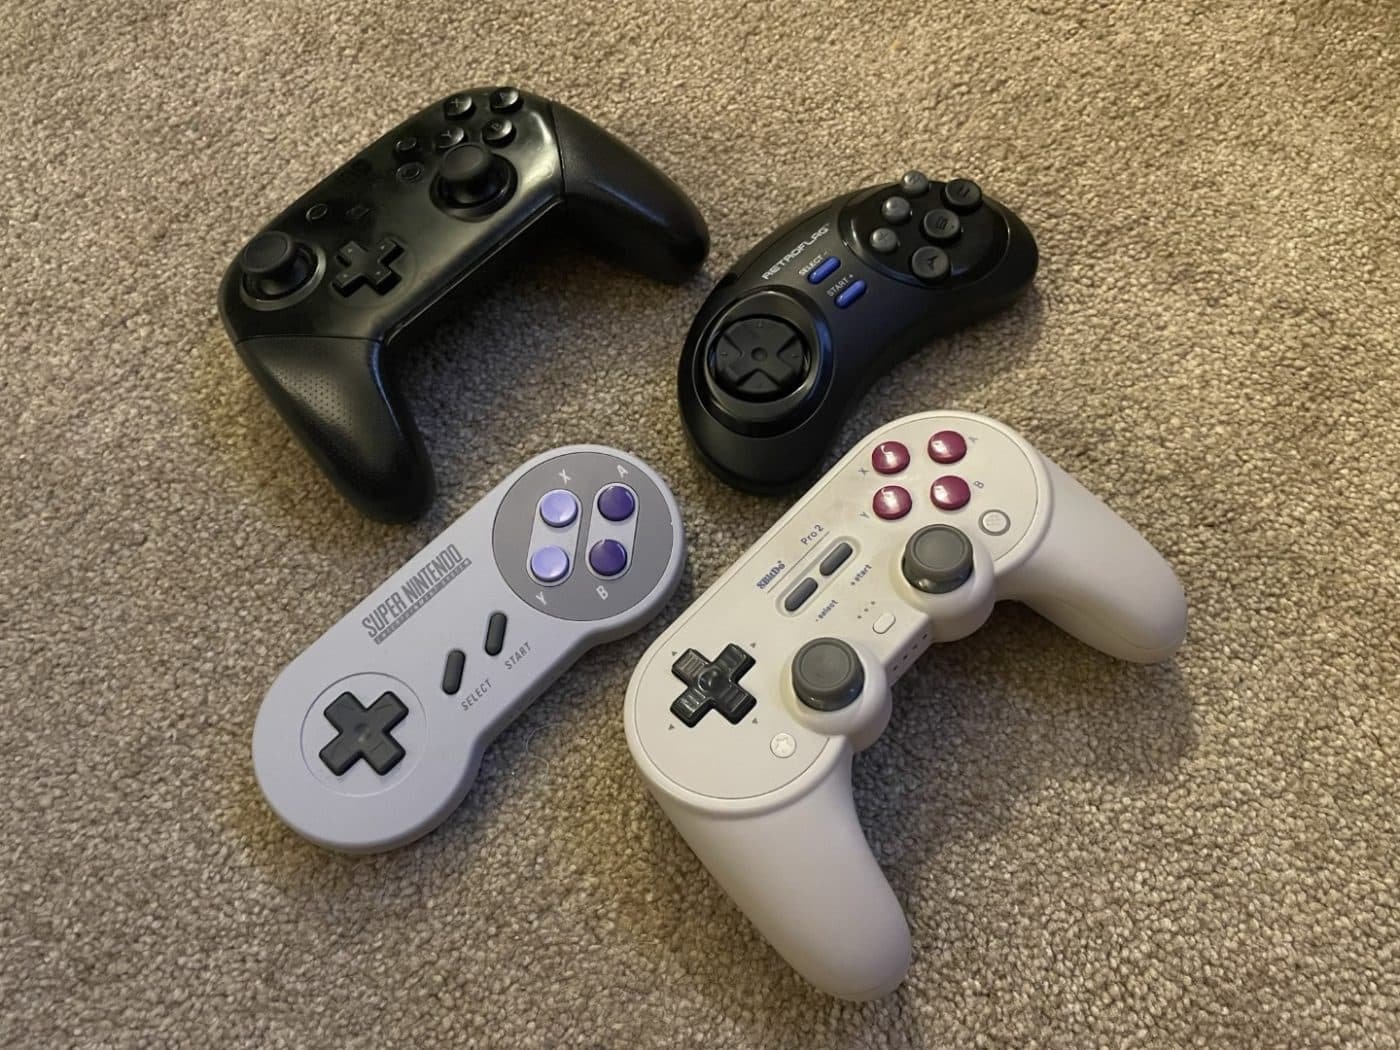 The retroflag classic 2. 4g controller-m alongside an 8bitdo pro 2, a switch pro controller, and an official snes switch controller.